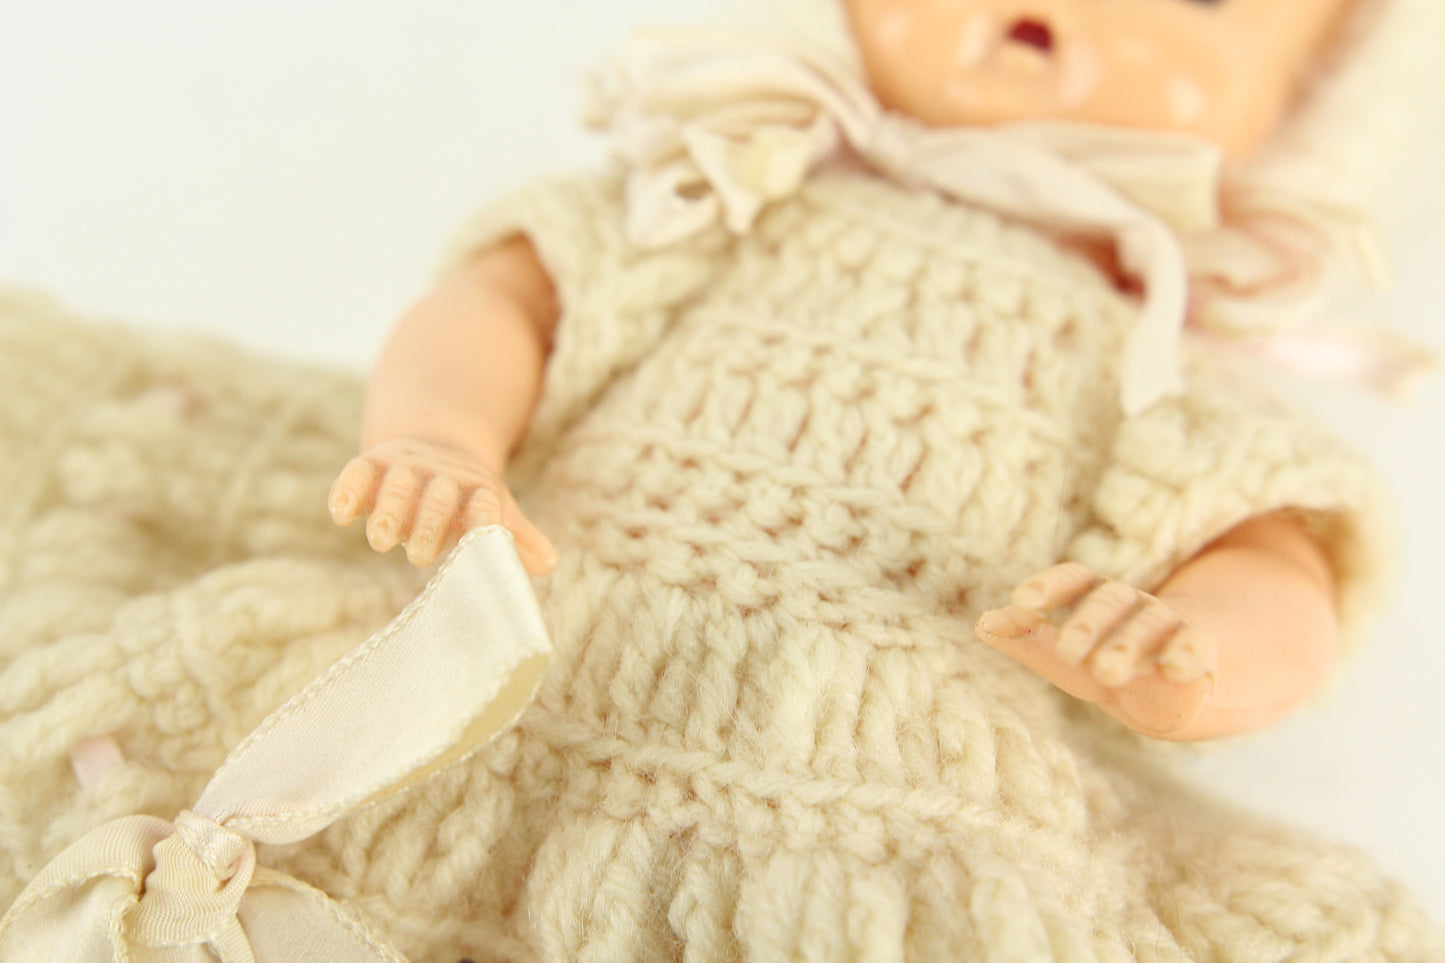 Plastic Baby Vintage Doll with Knit Dress and Hood, 7.5"